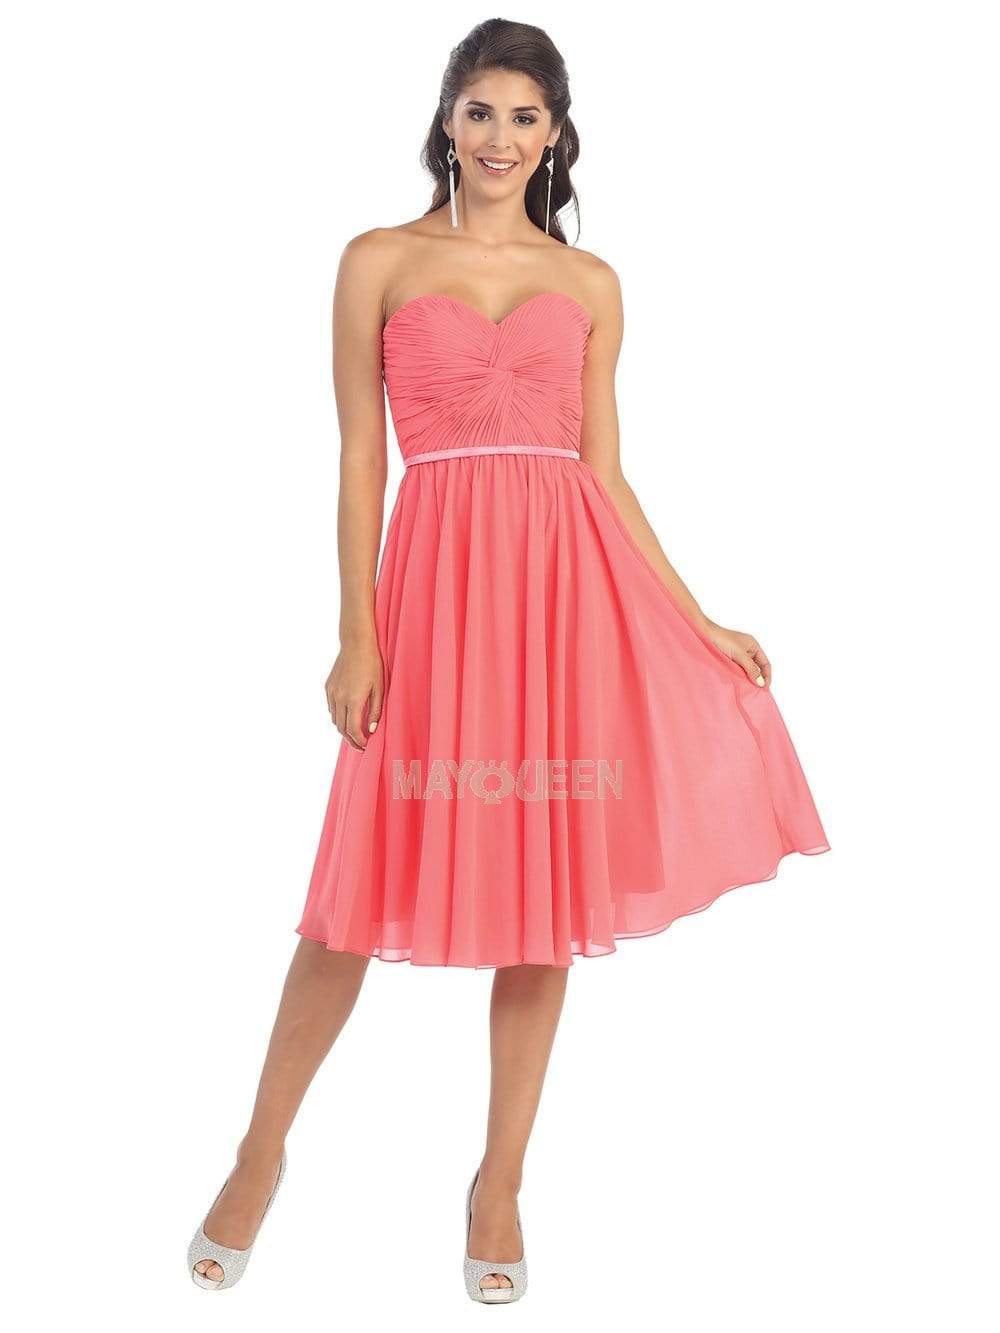 May Queen - MQ1161 Strapless Sweetheart Neckline Twisted Front Dress Wedding Guest 4 / Coral